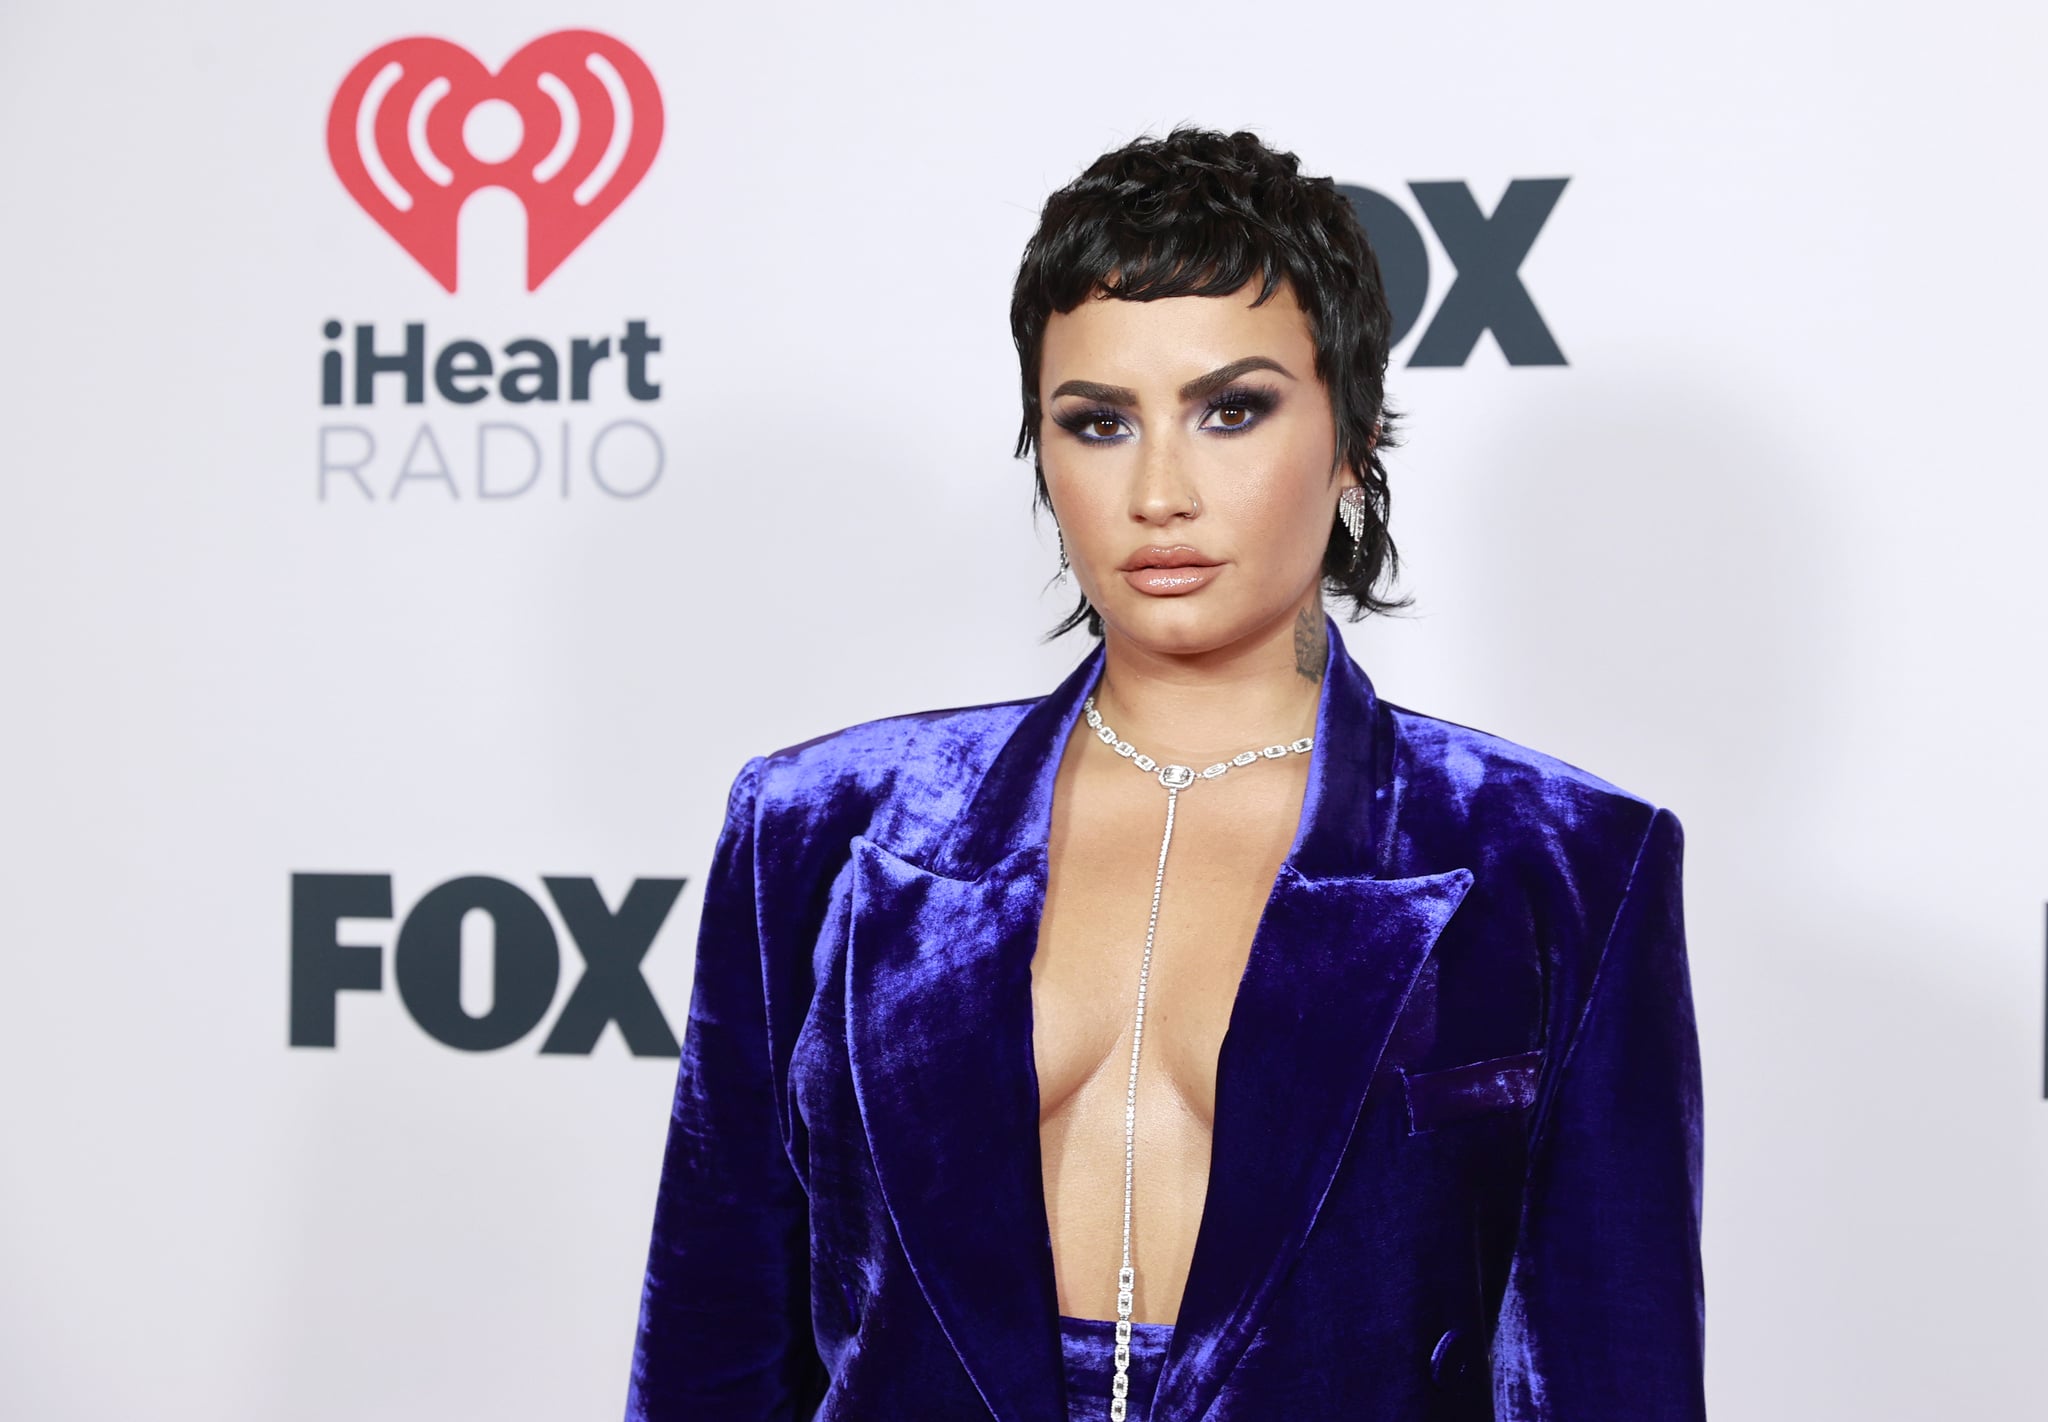 LOS ANGELES, CALIFORNIA - MAY 27: (EDITORIAL USE ONLY) Demi Lovato attends the 2021 iHeartRadio Music Awards at The Dolby Theater in Los Angeles, California, which was broadcast live on FOX on May 27, 2021. (Photo by Emma McIntyre/Getty Images for iHeartMedia)